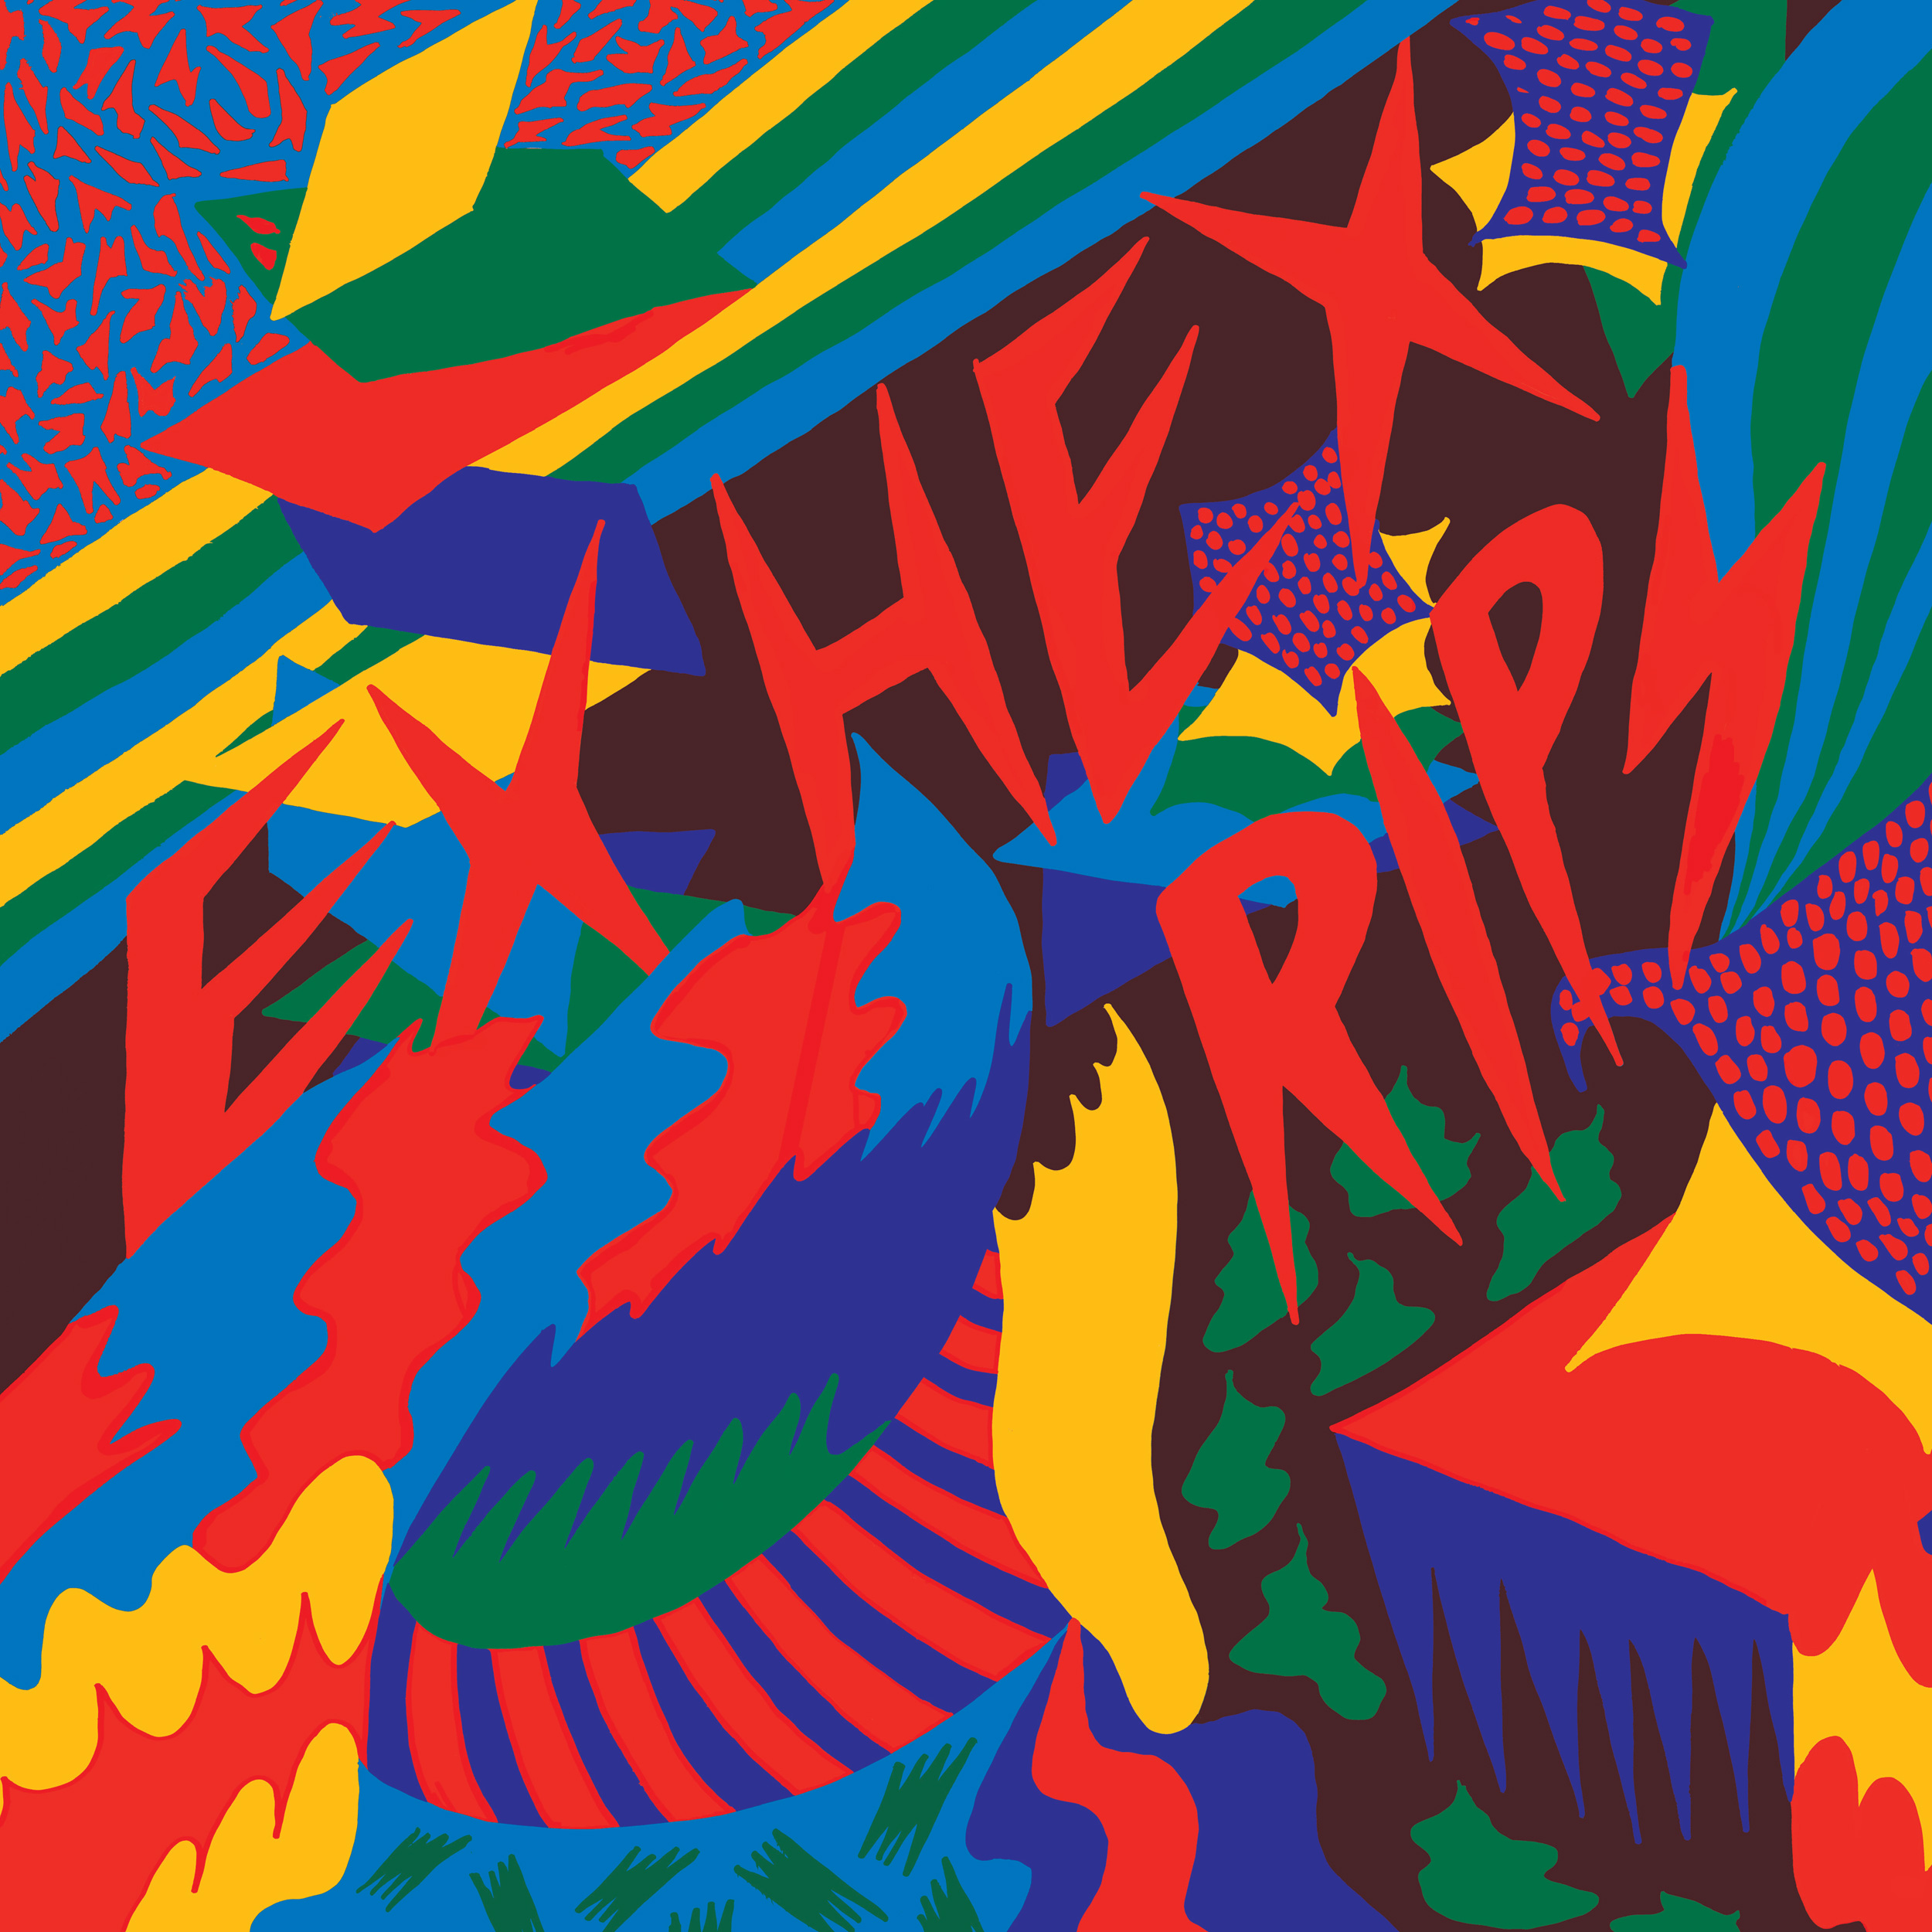 “Rips by Ex Hex is my new favorite album,” Durant says. “It makes me want to dance!” $14, barnesandnoble.com